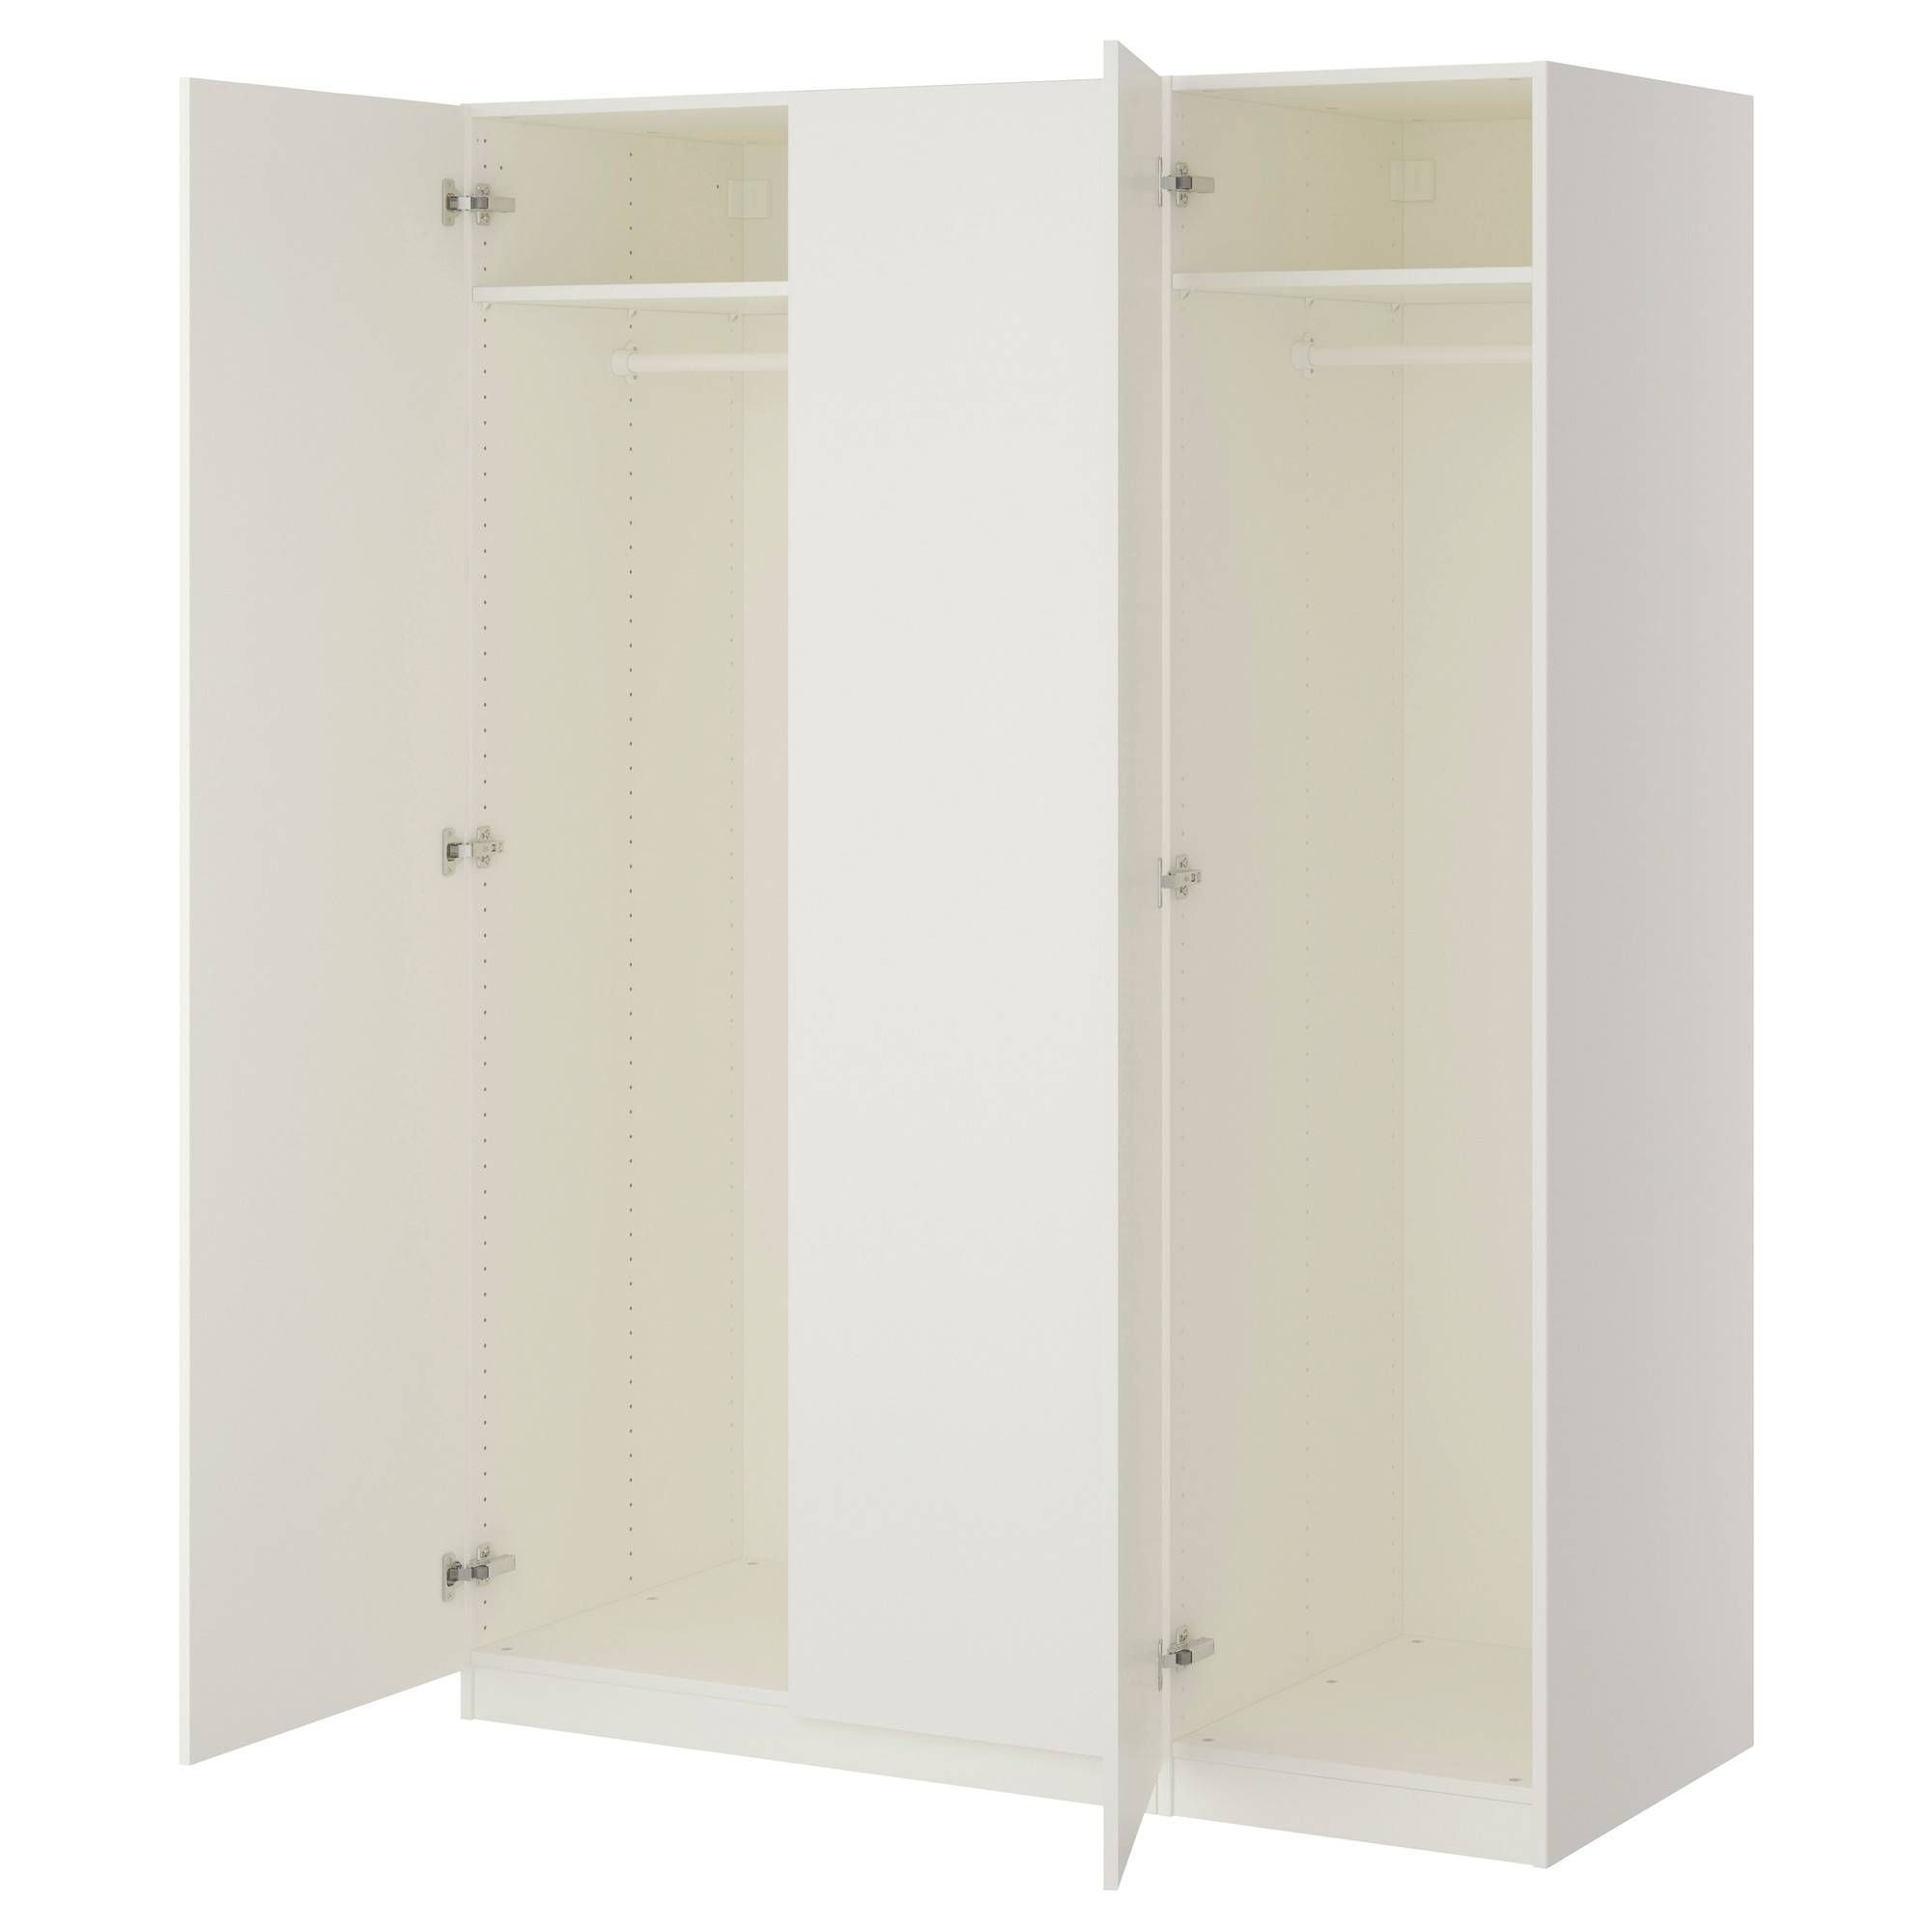 Wardrobes | Ikea In Double Rail Wardrobes (View 21 of 30)